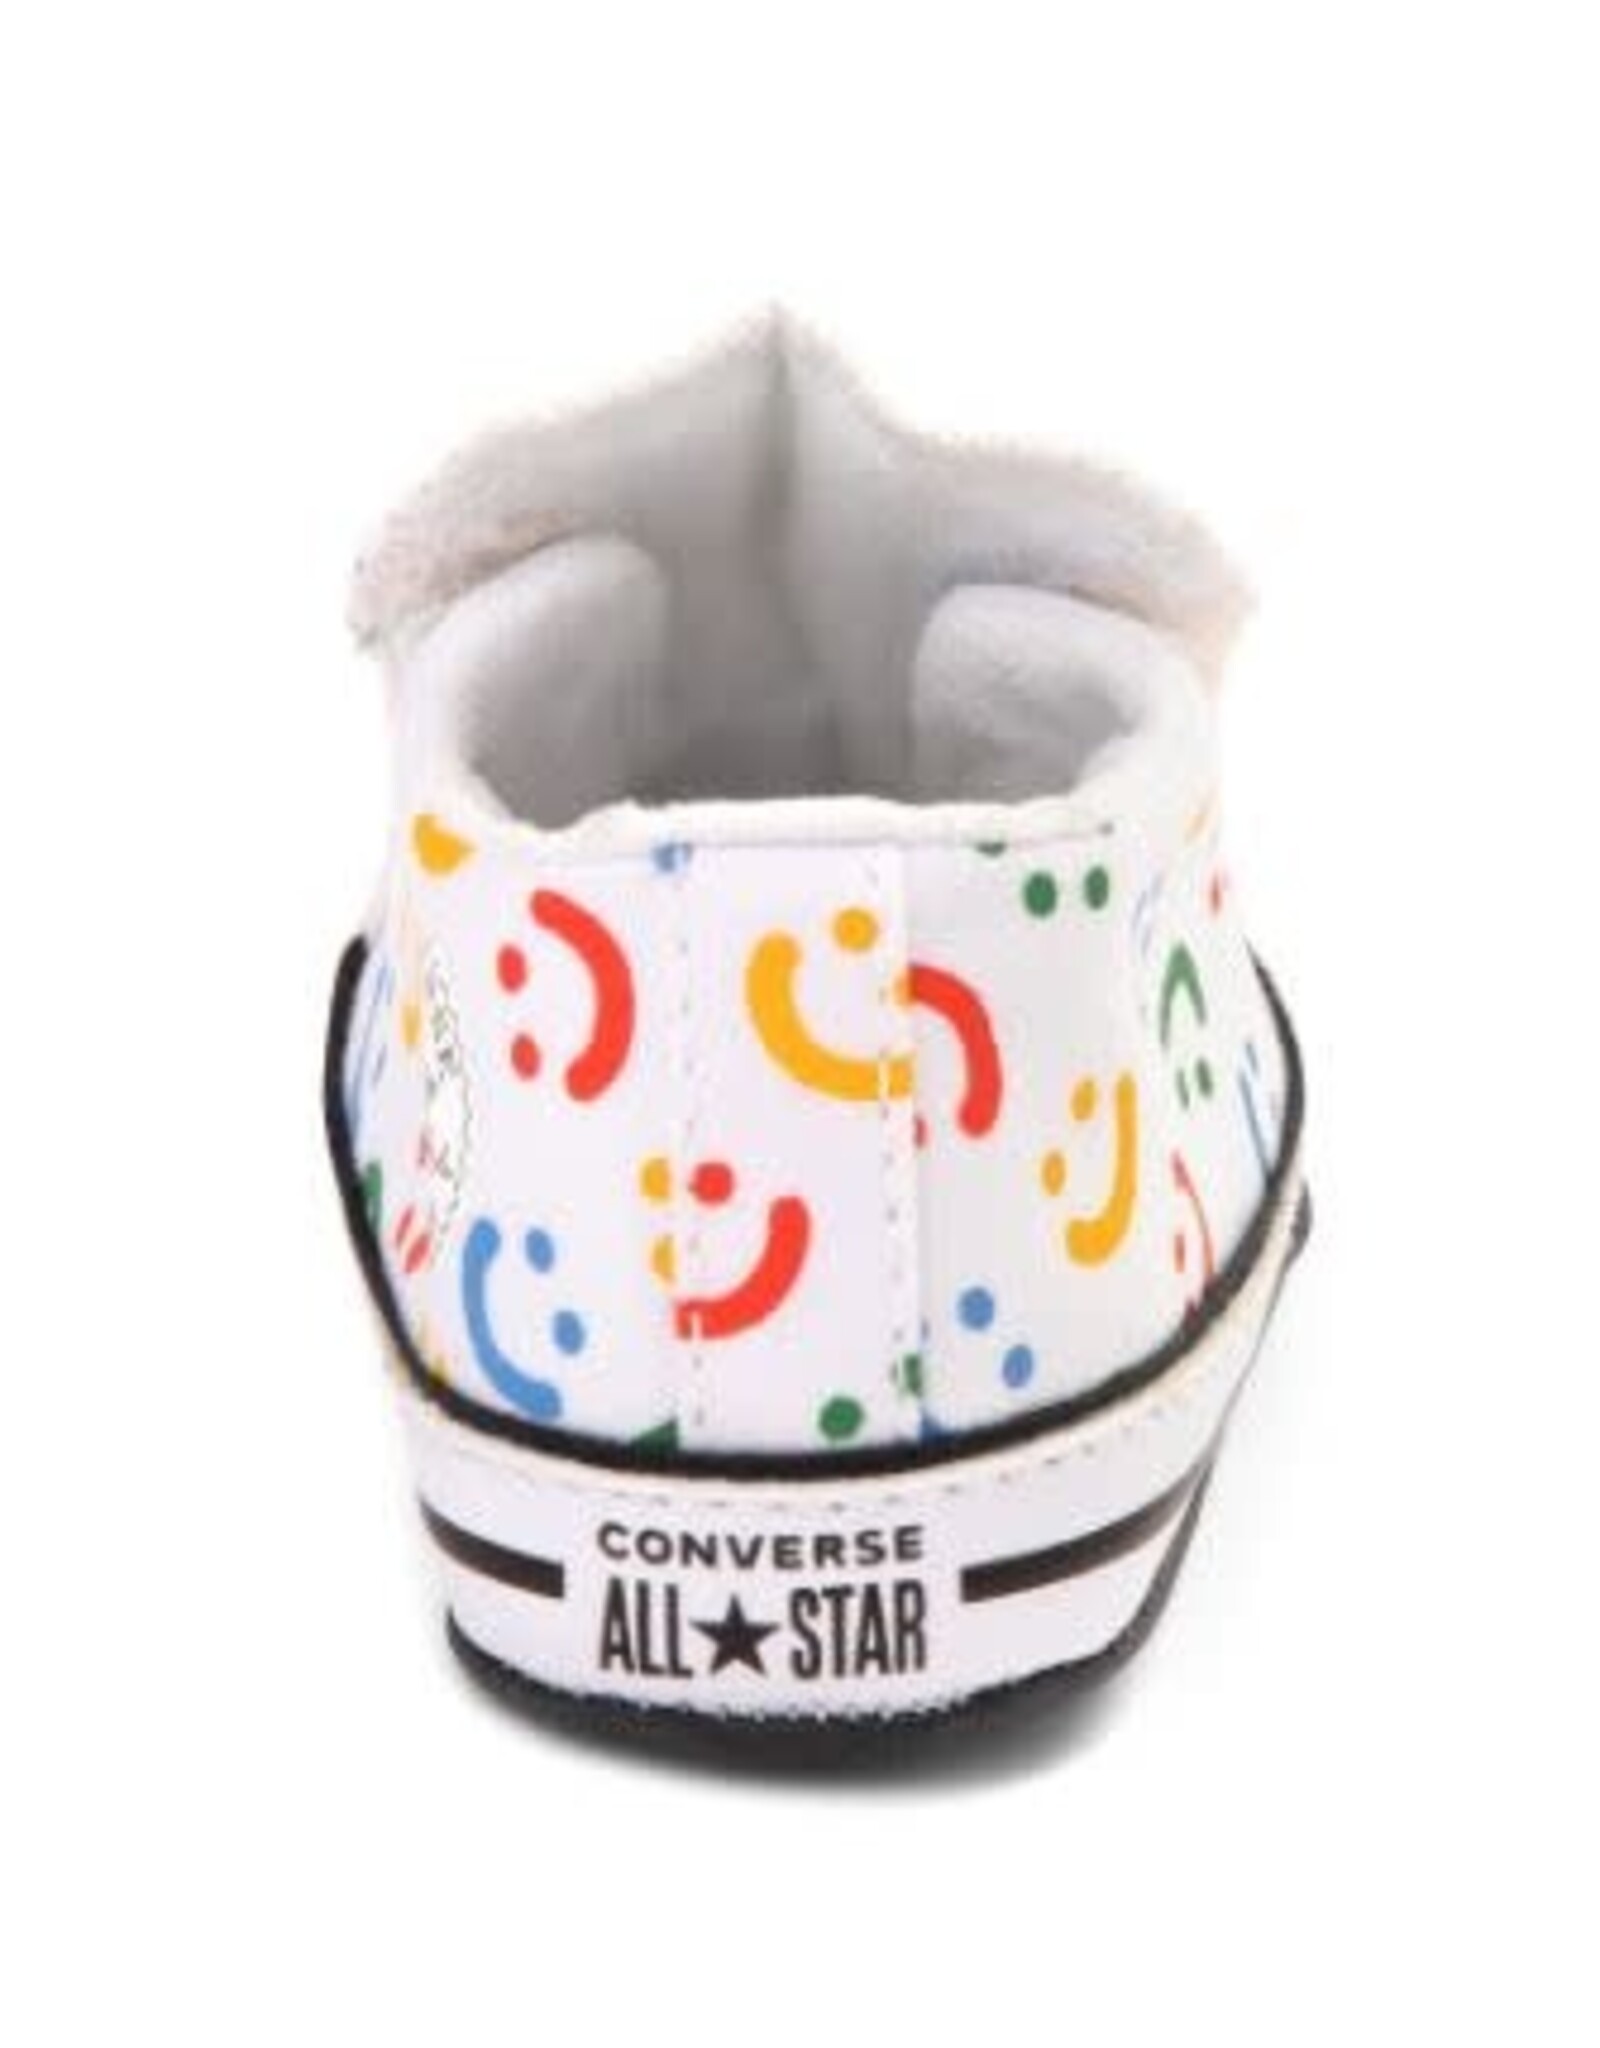 CTAS CRIBSTER EASY ON DOODLES WHITE/FEVER DREAM/WHITE C12FD - A06353C